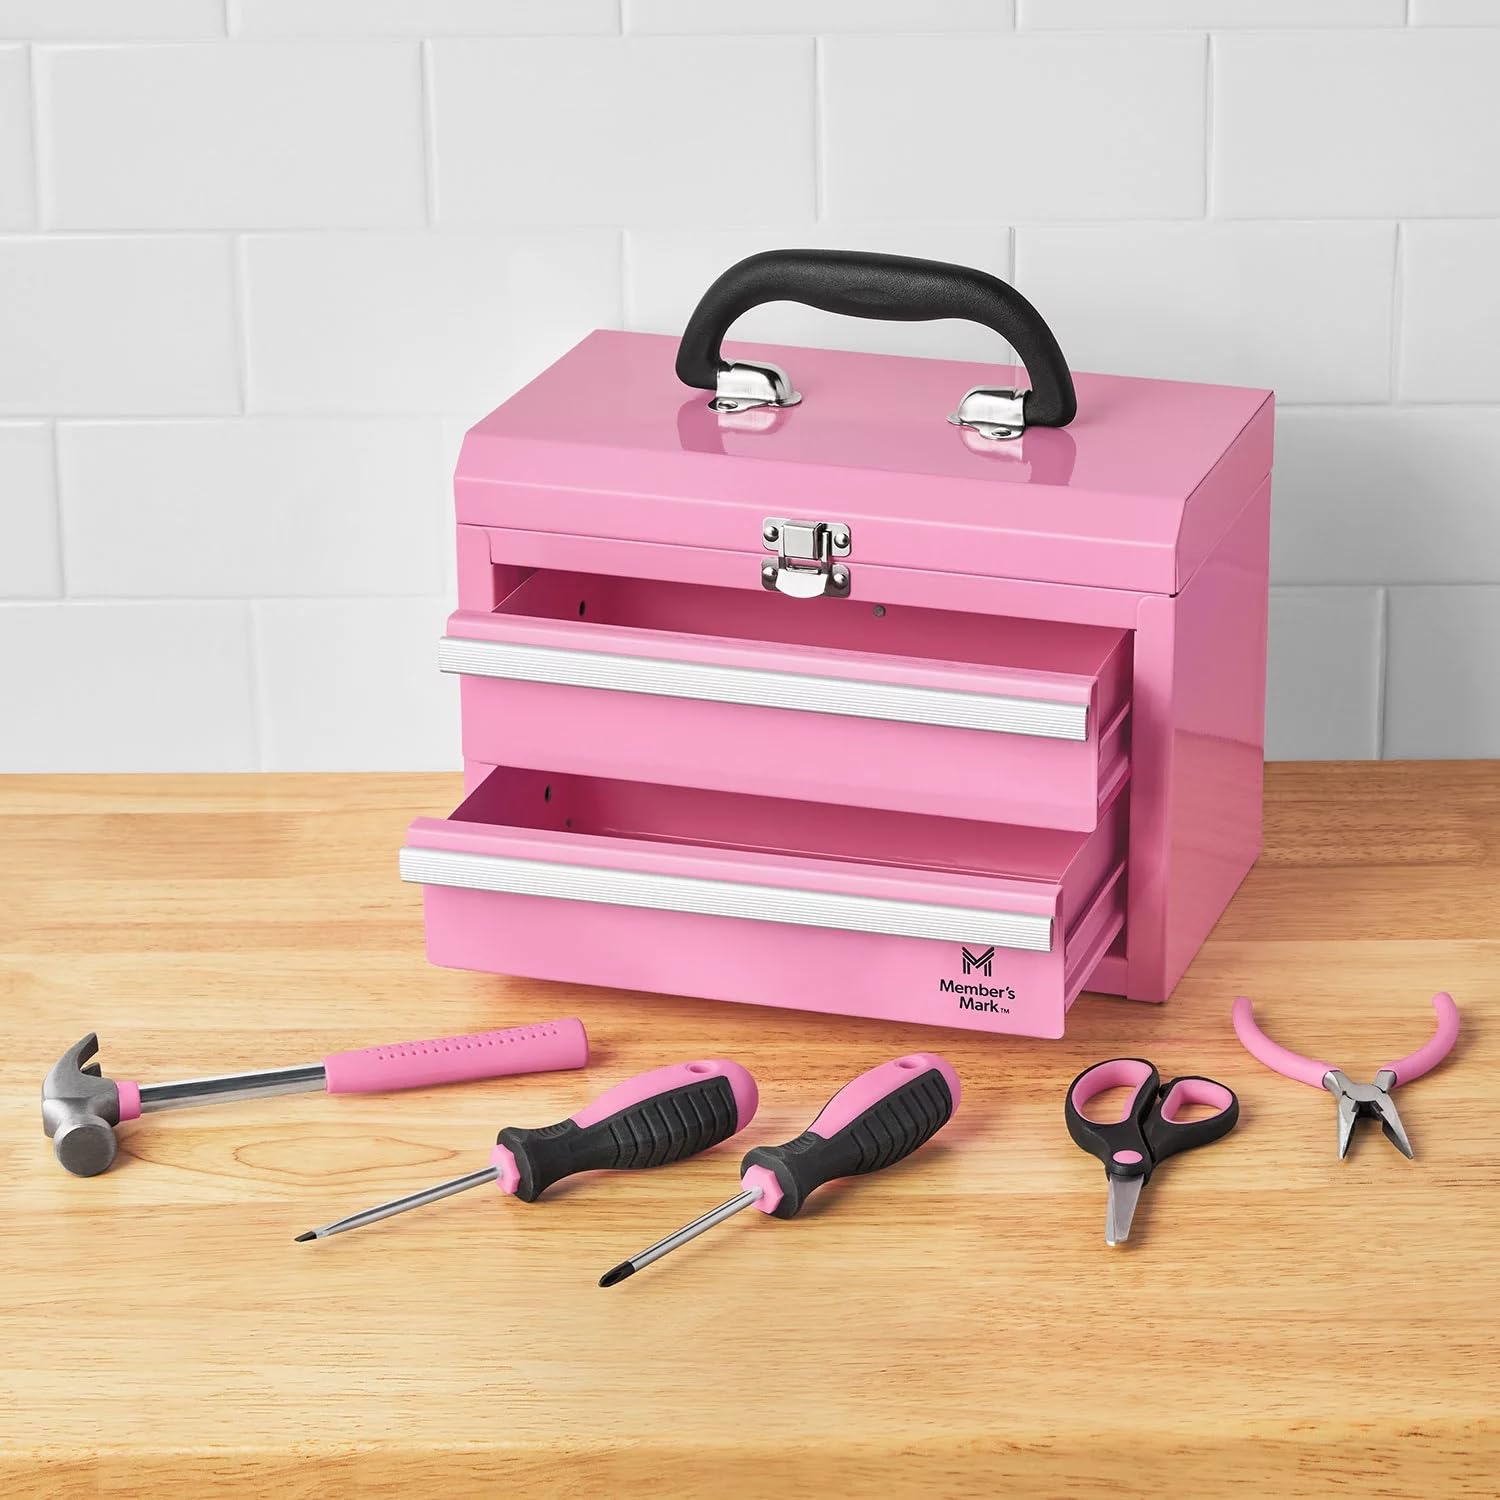 Member's Mark 11" Toolbox with 5 Piece Tool Set - Pink